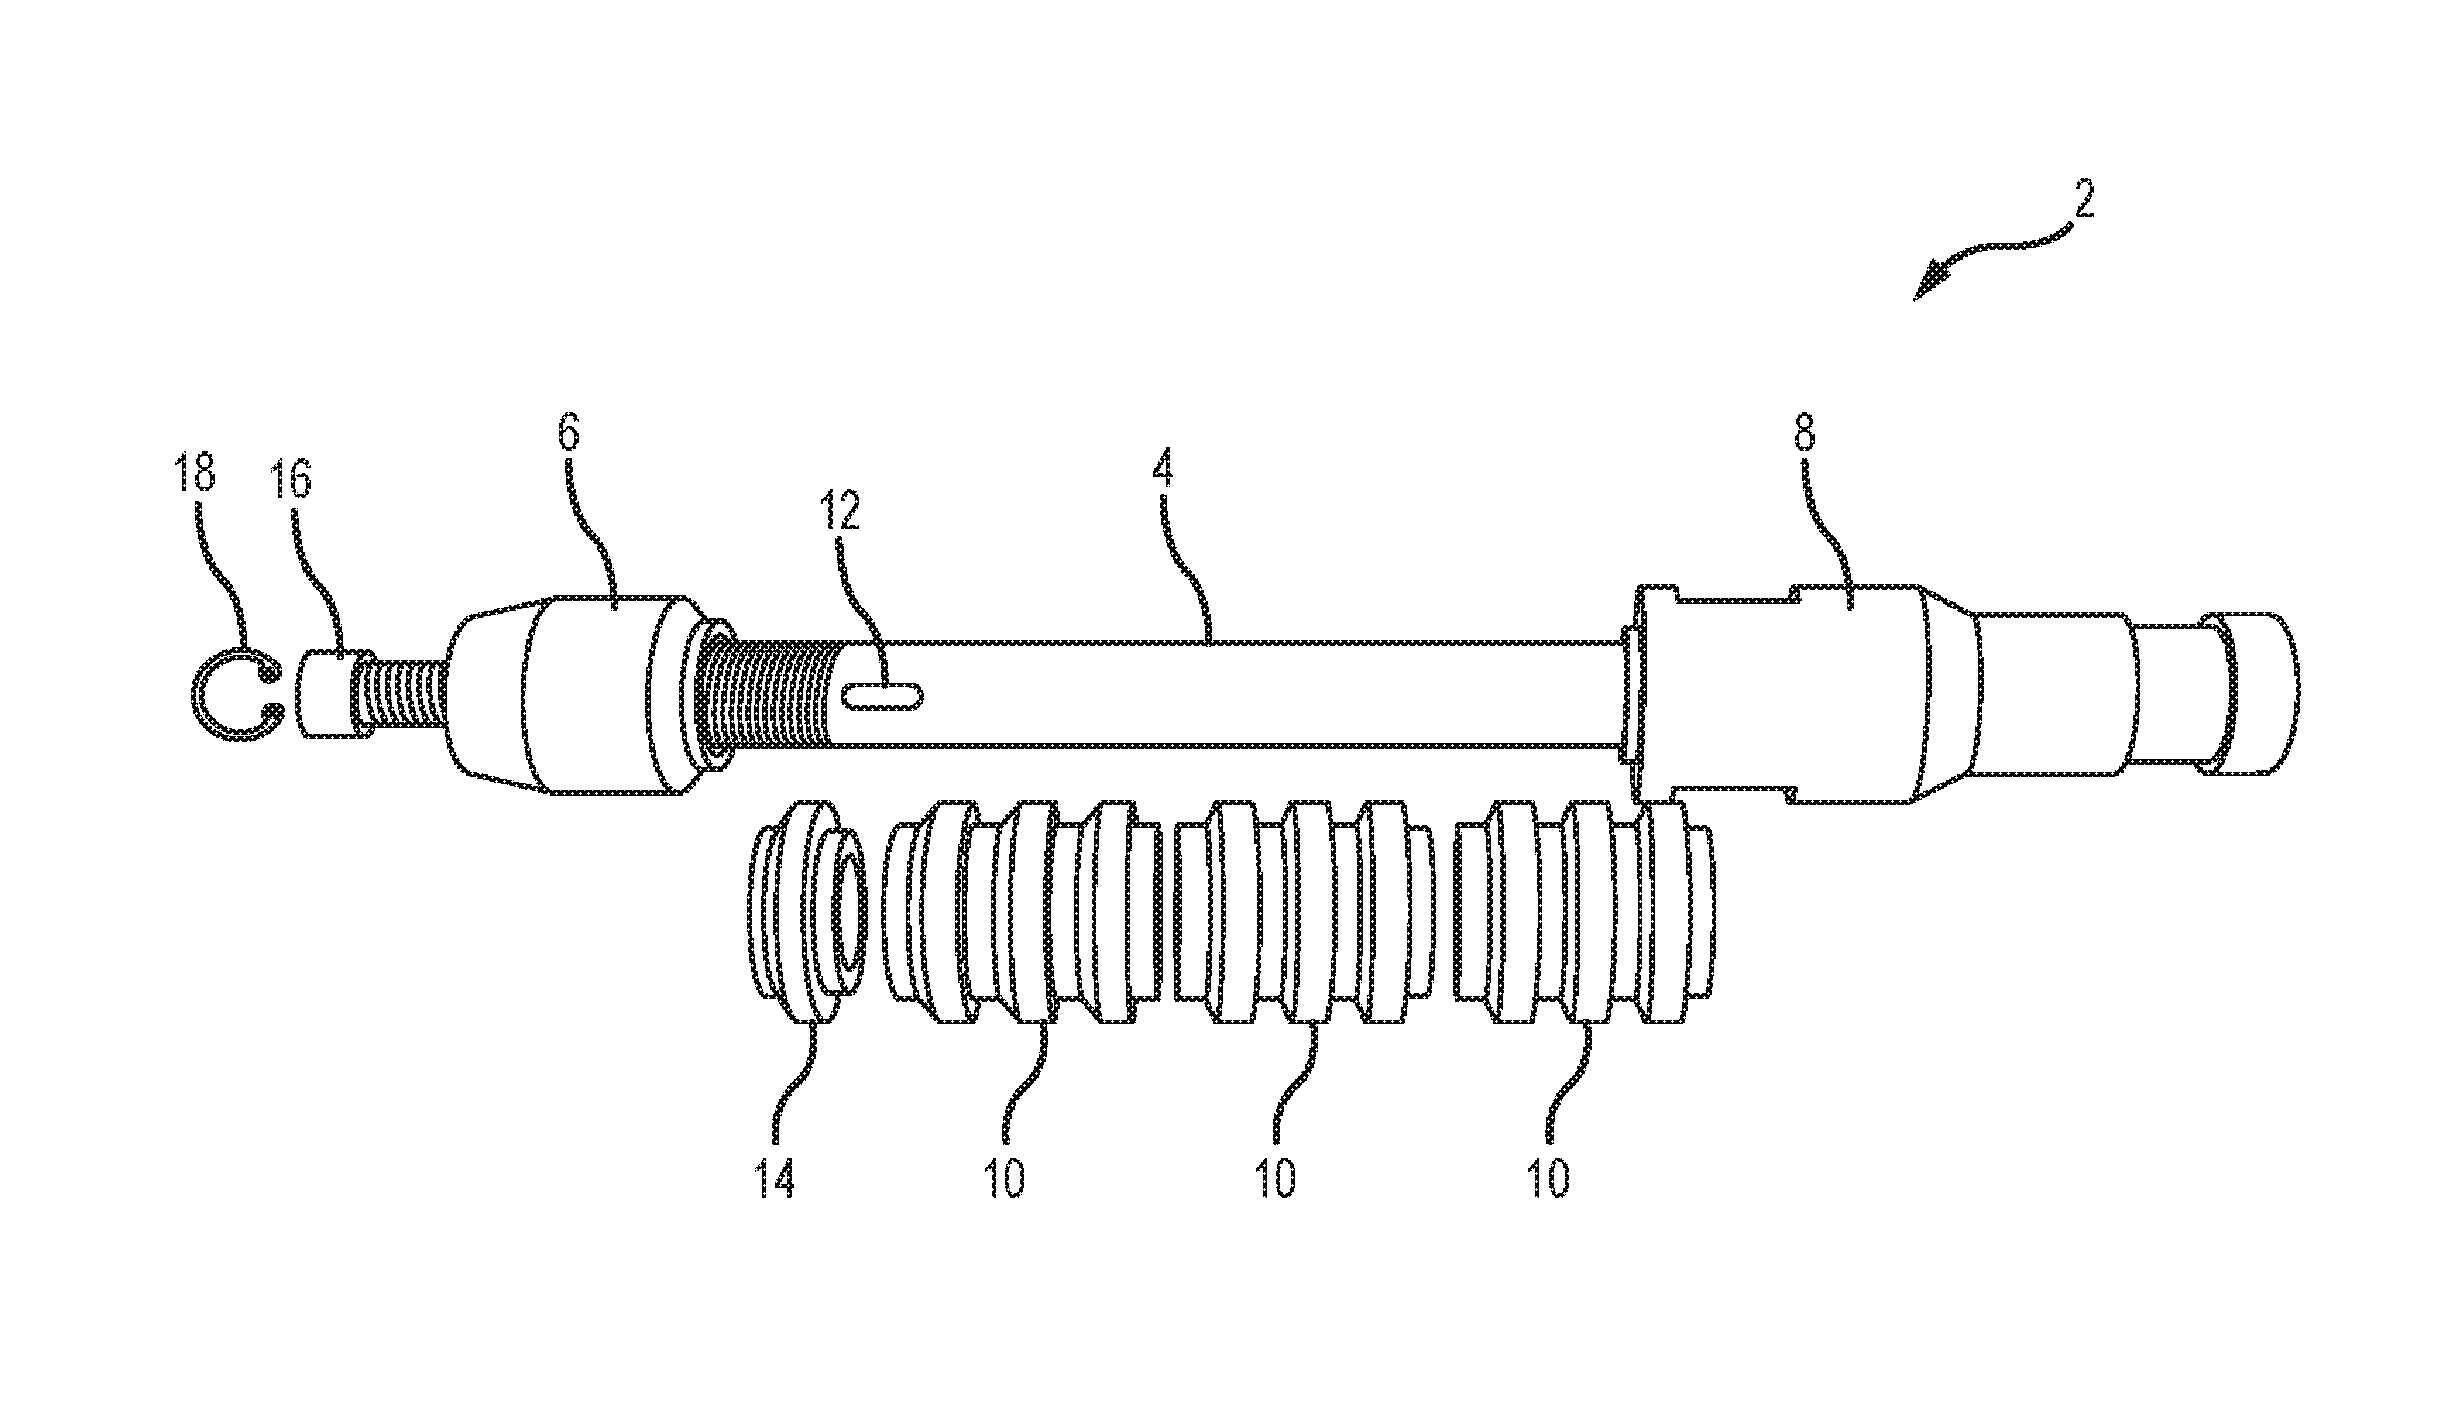 Modular plunger for a hydrocarbon wellbore